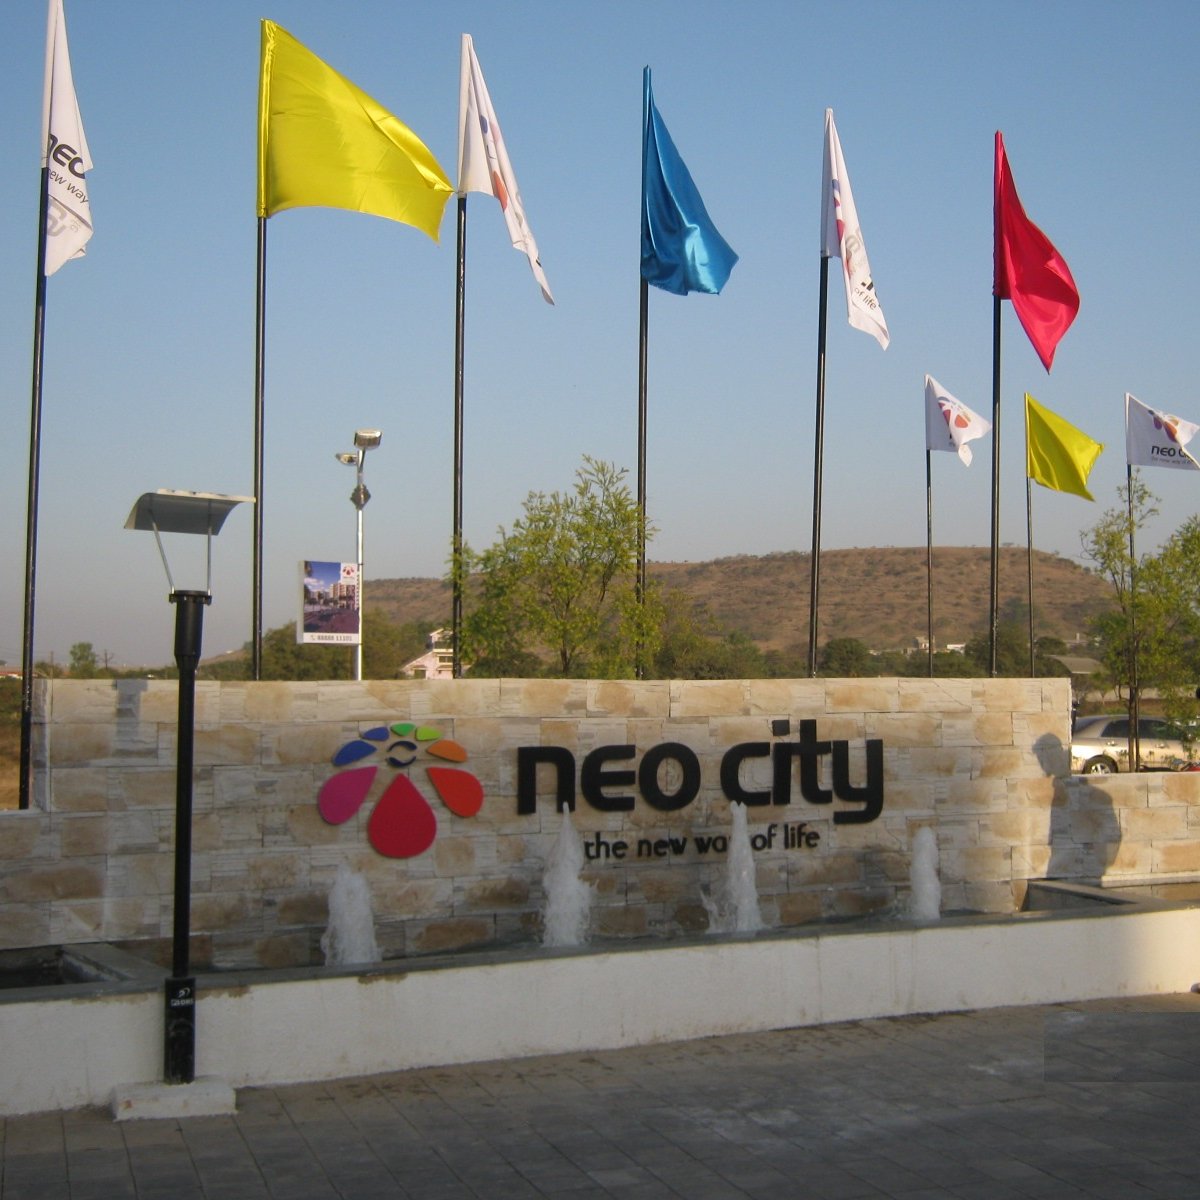 Neo City (@neocitywagholi) is a residential complex in Wagholi, Pune with over 500 units.